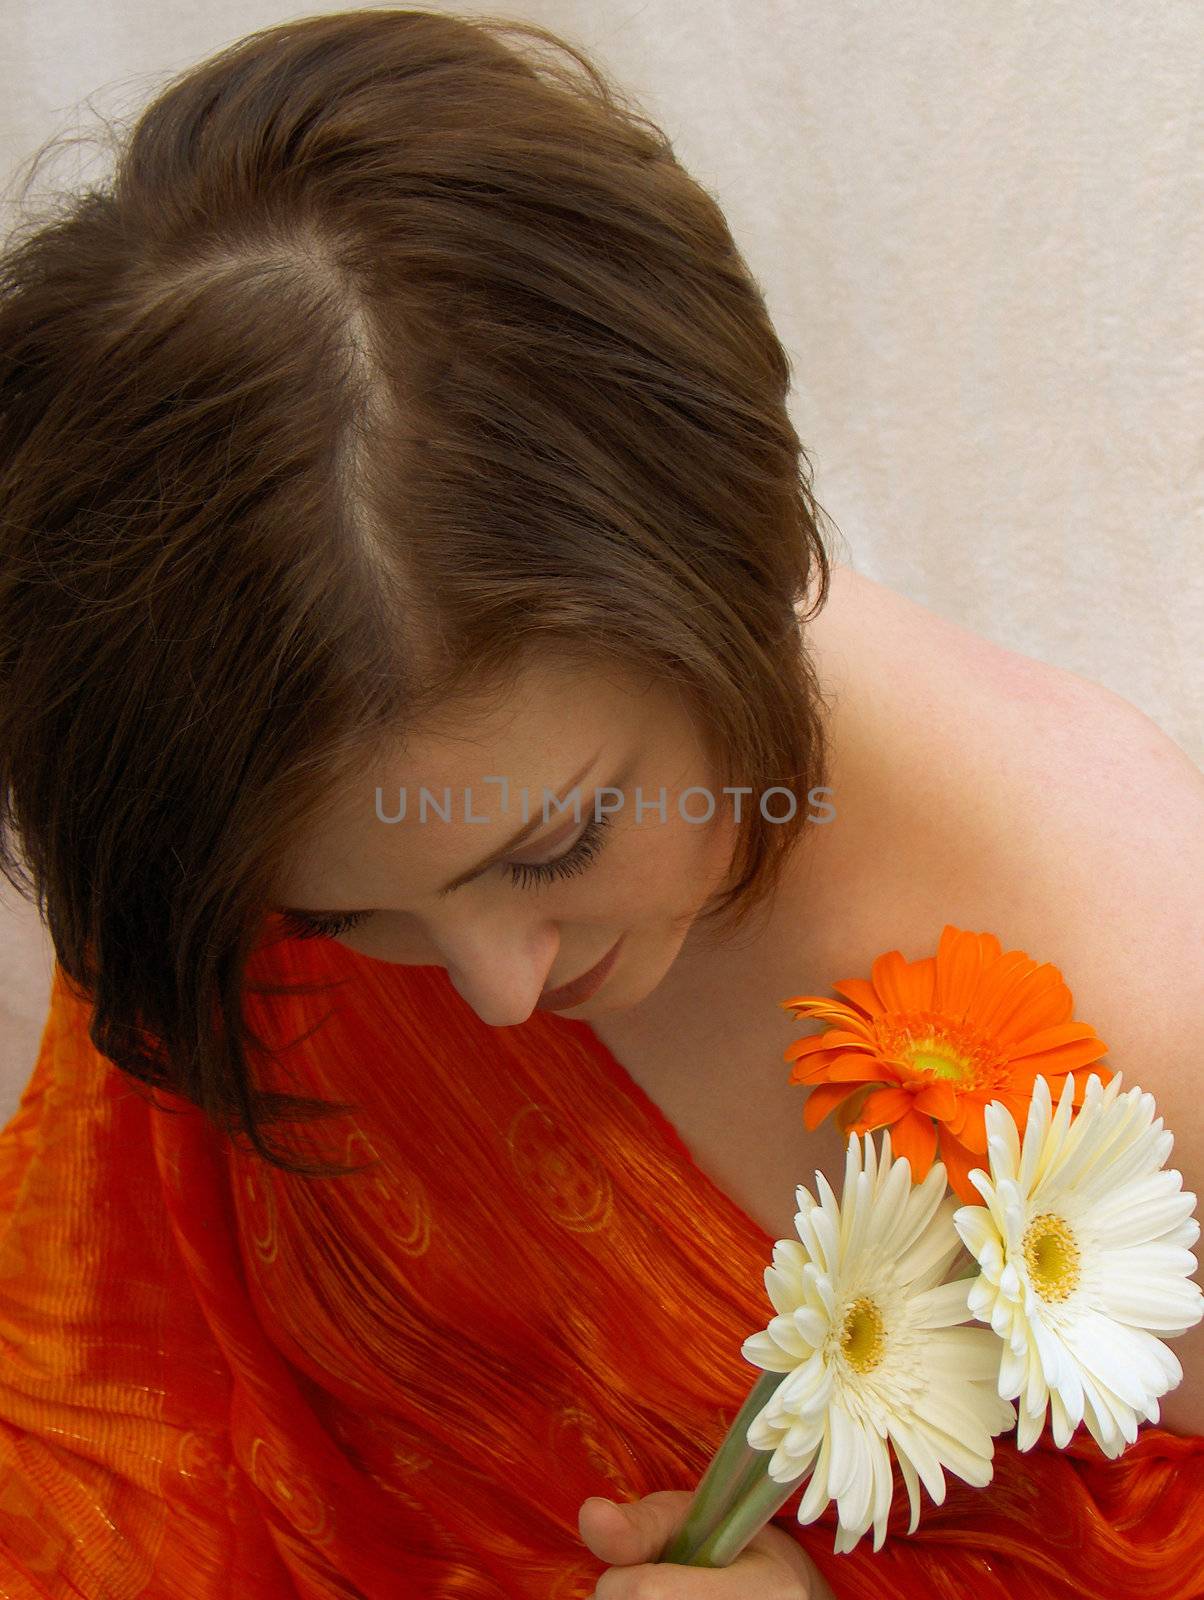 A beautiful brunette, wearing red, with a bouquet of daisies, looking down demurely.